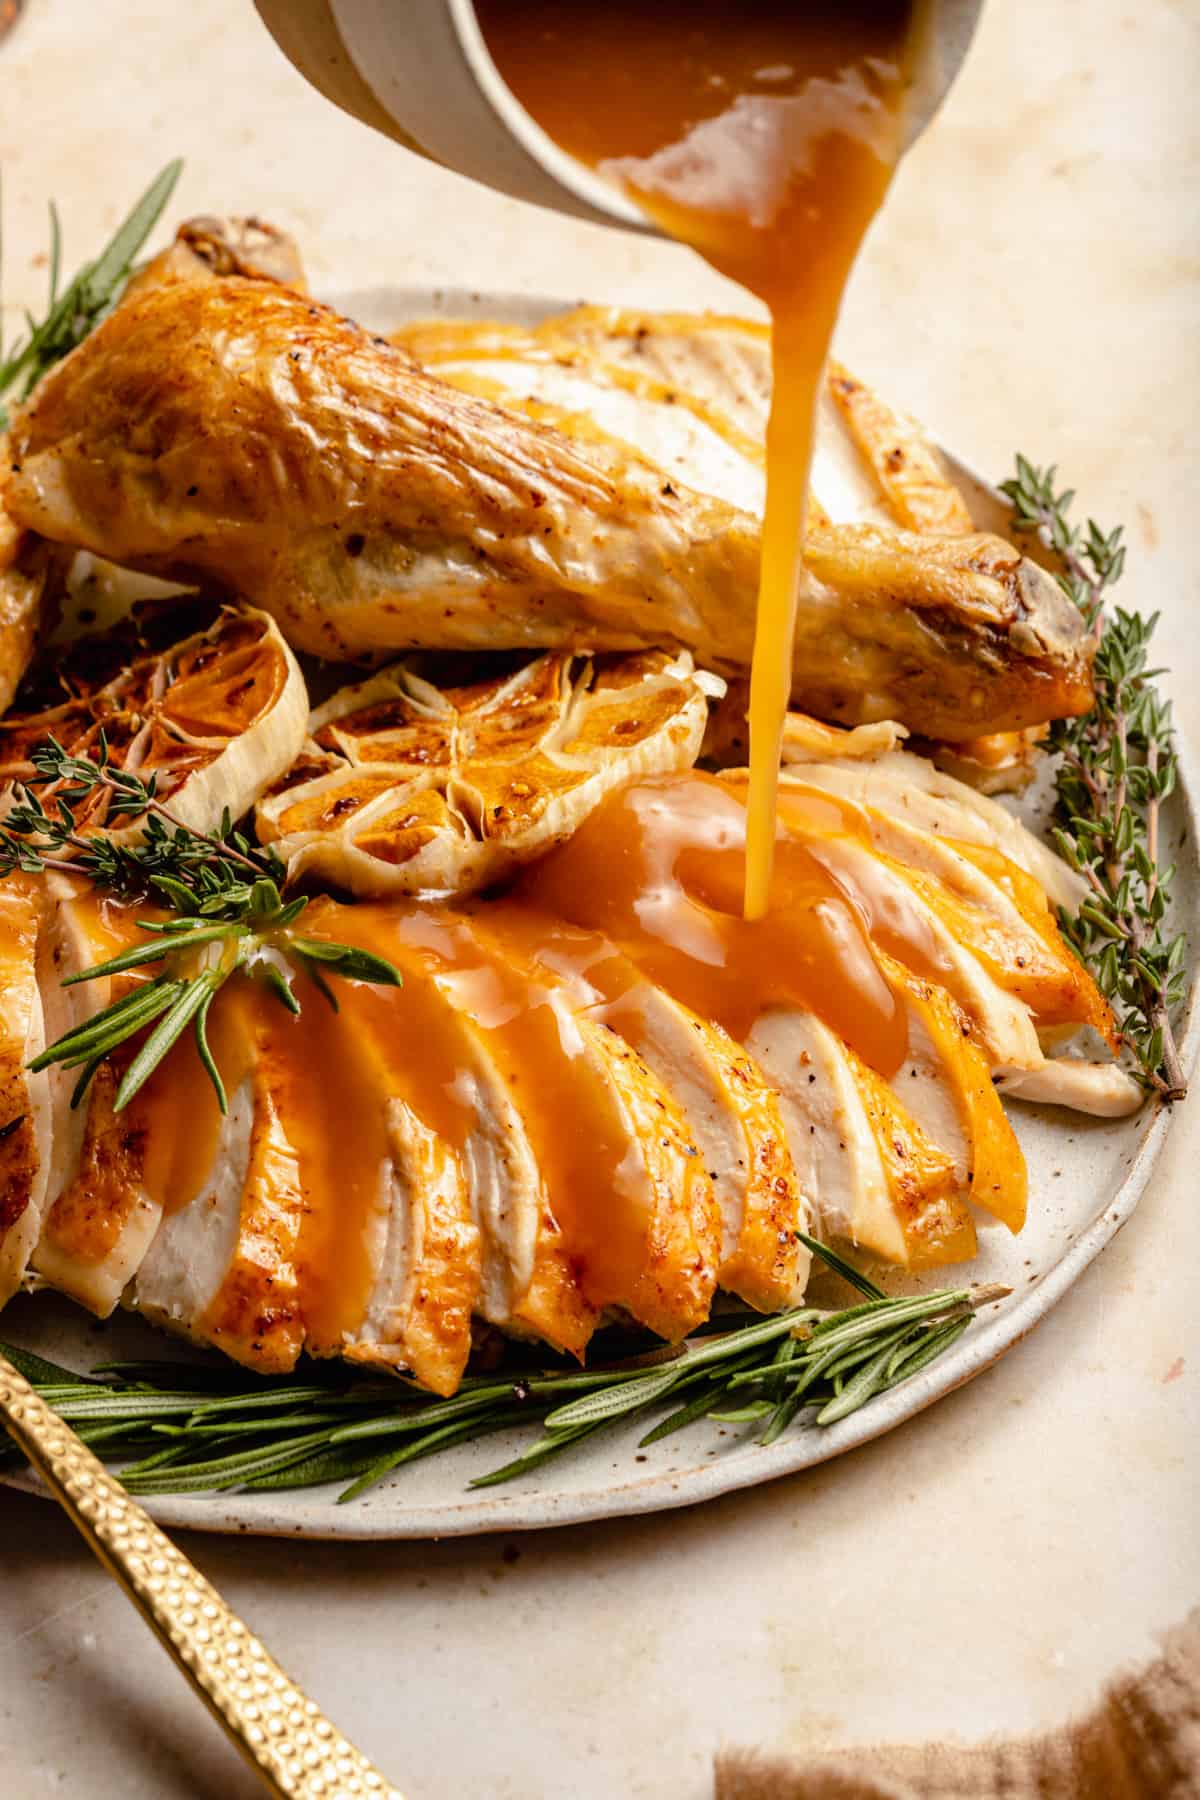 Gravy being poured over slices of chicken breast on the platter with roasted garlic and rosemary and a fork.